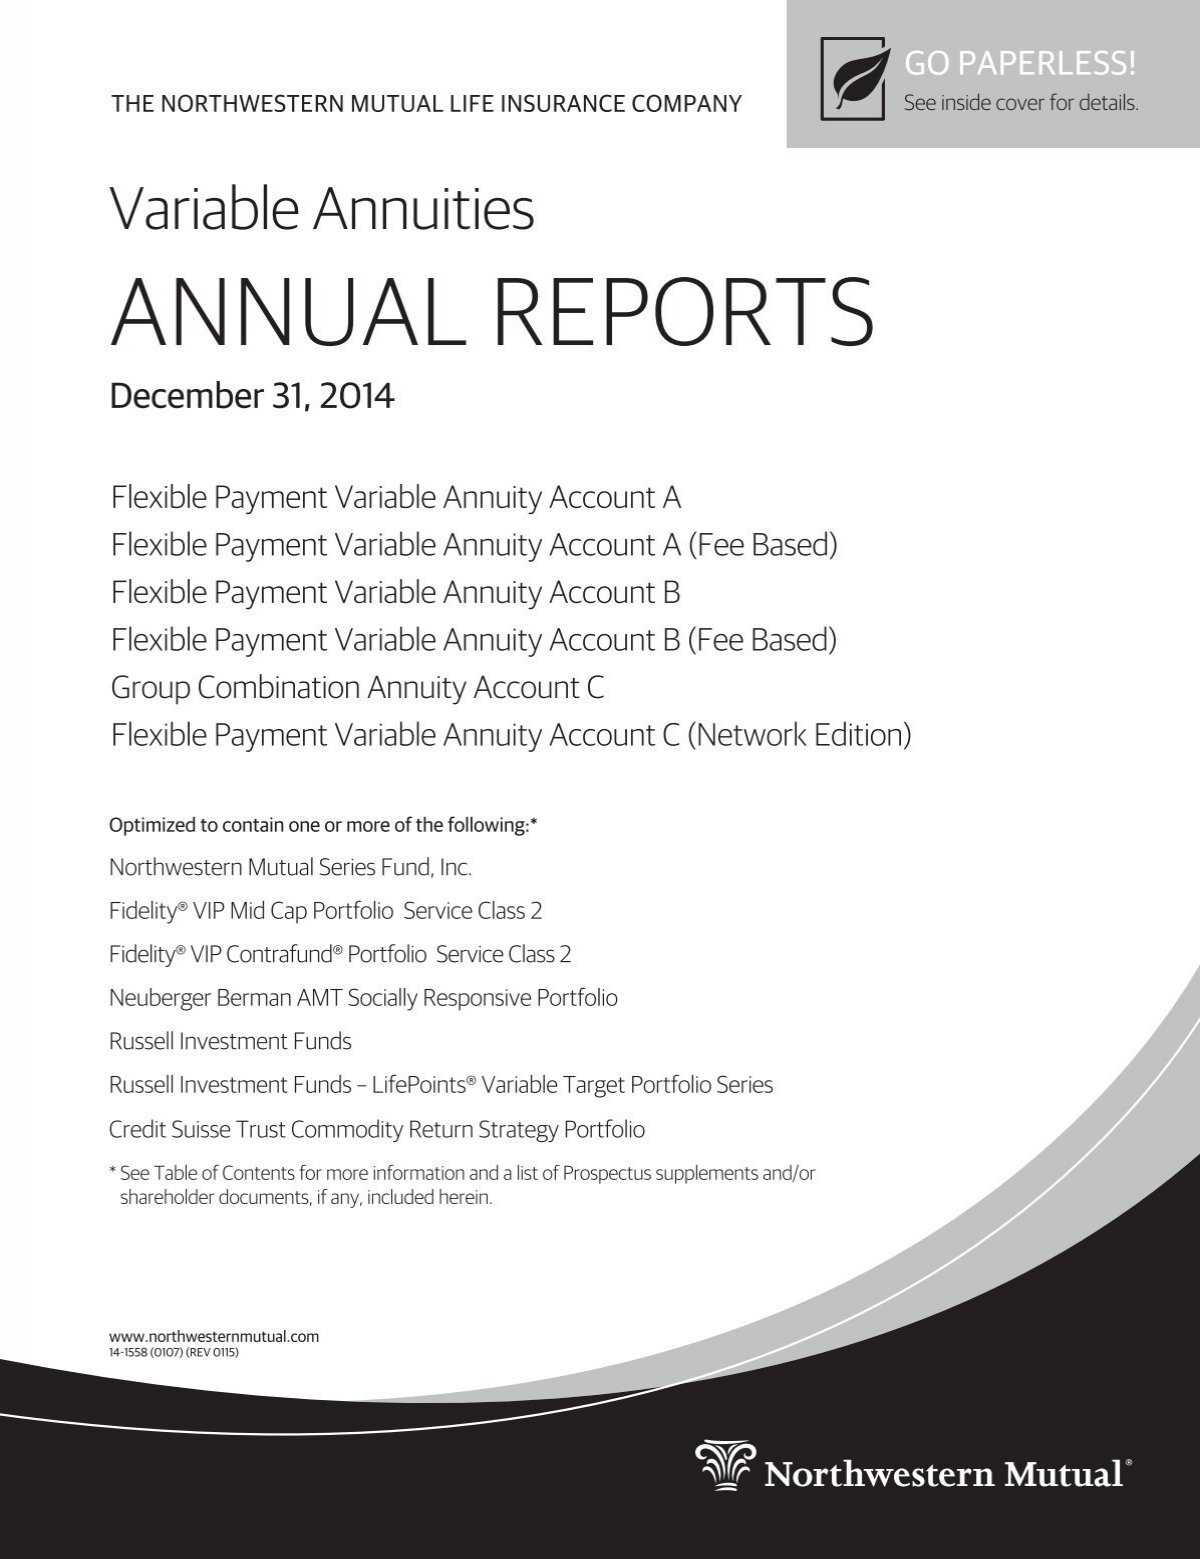 Northwestern Mutual Variable Annuities 2012 Annual Reports